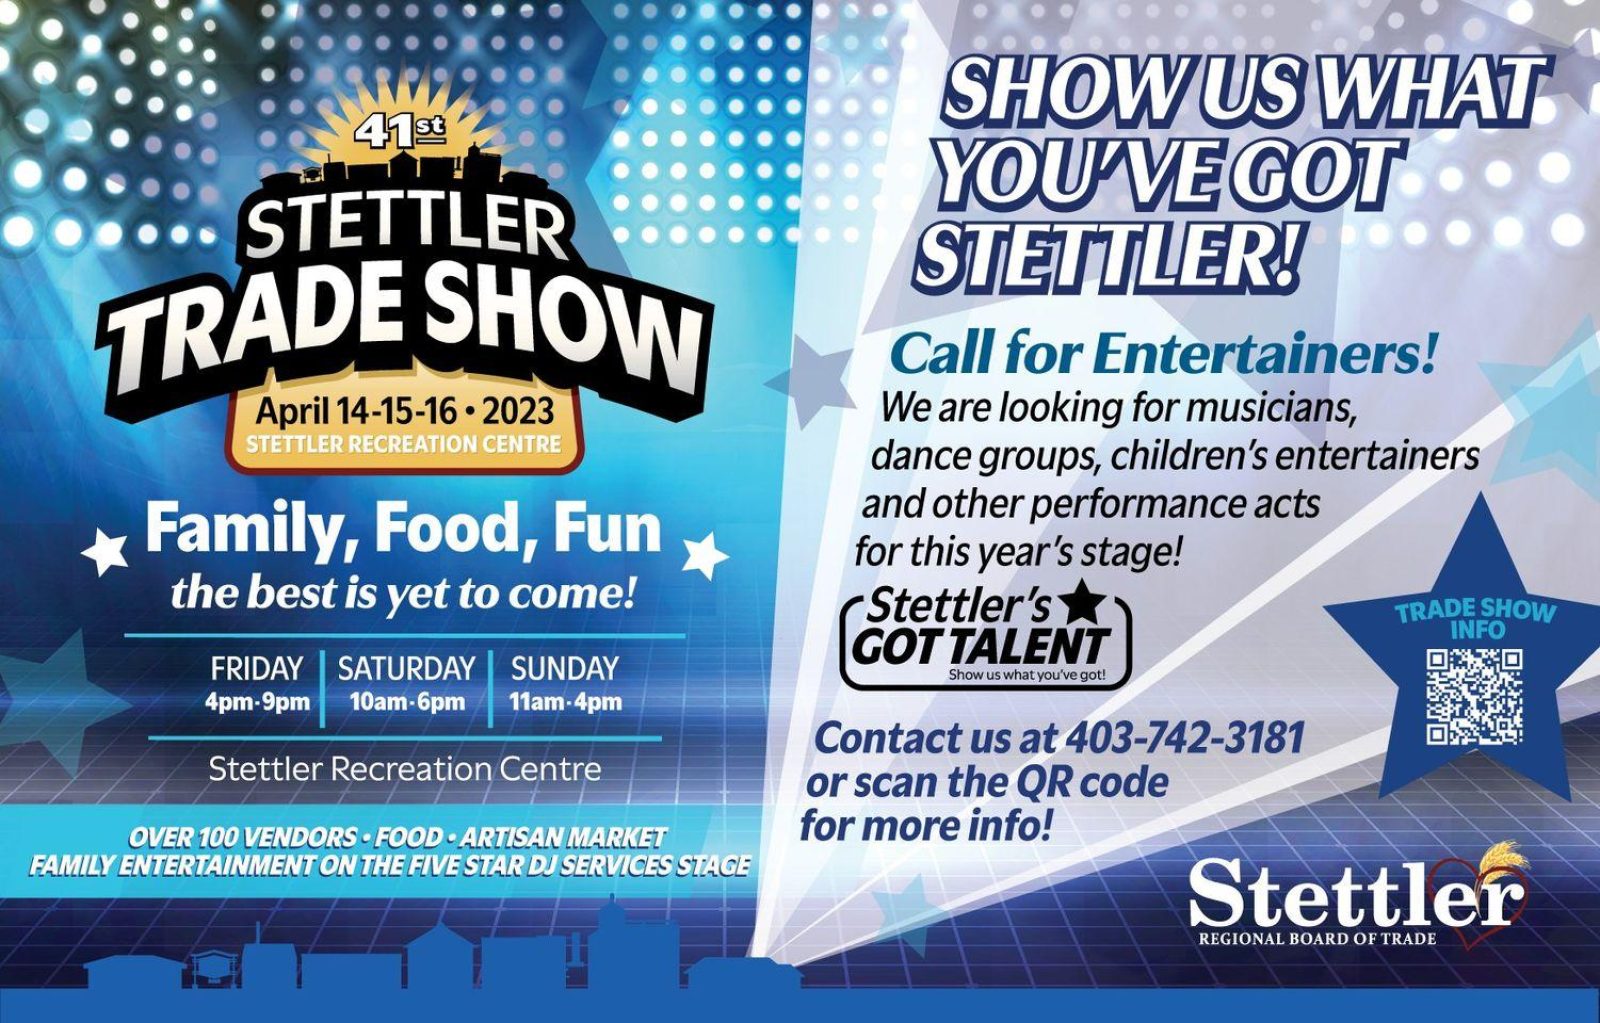 Trade show april 14 16 call for entertainers